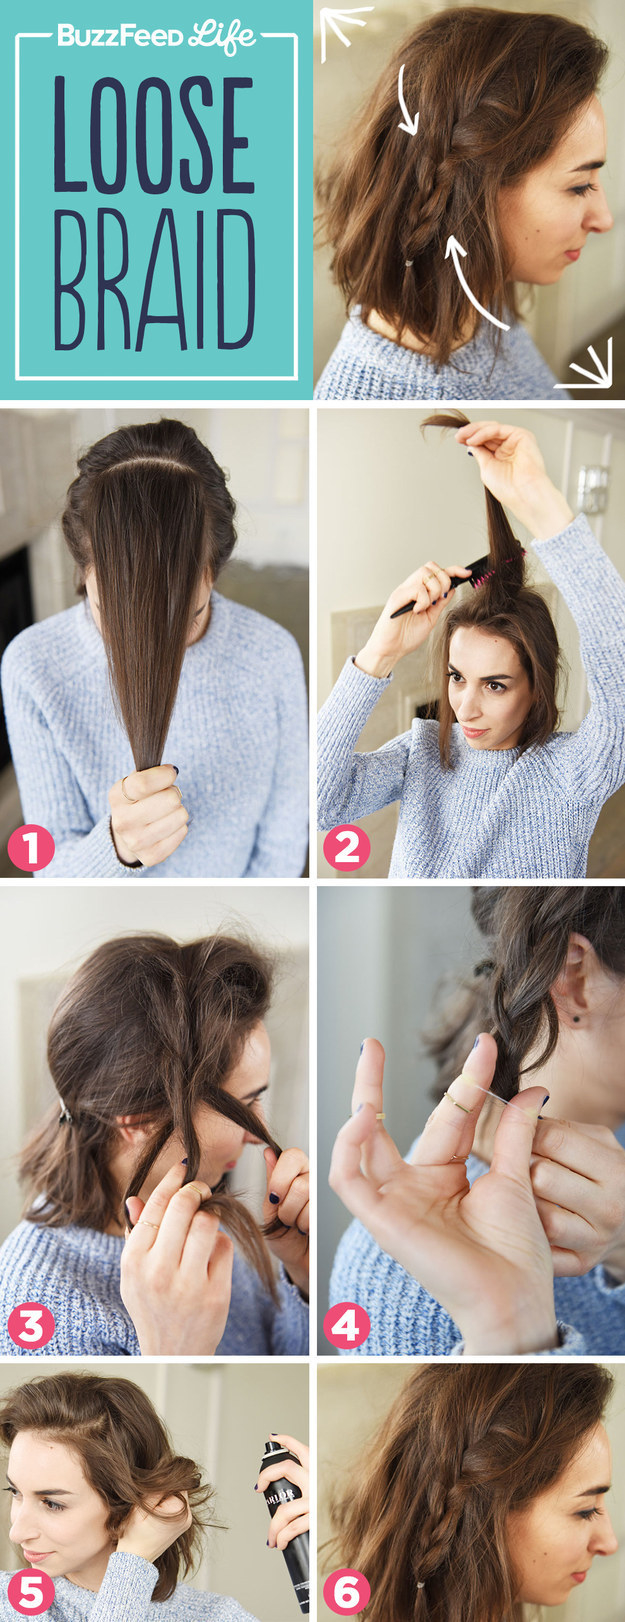 23 FiveMinute Hairstyles For Busy Mornings